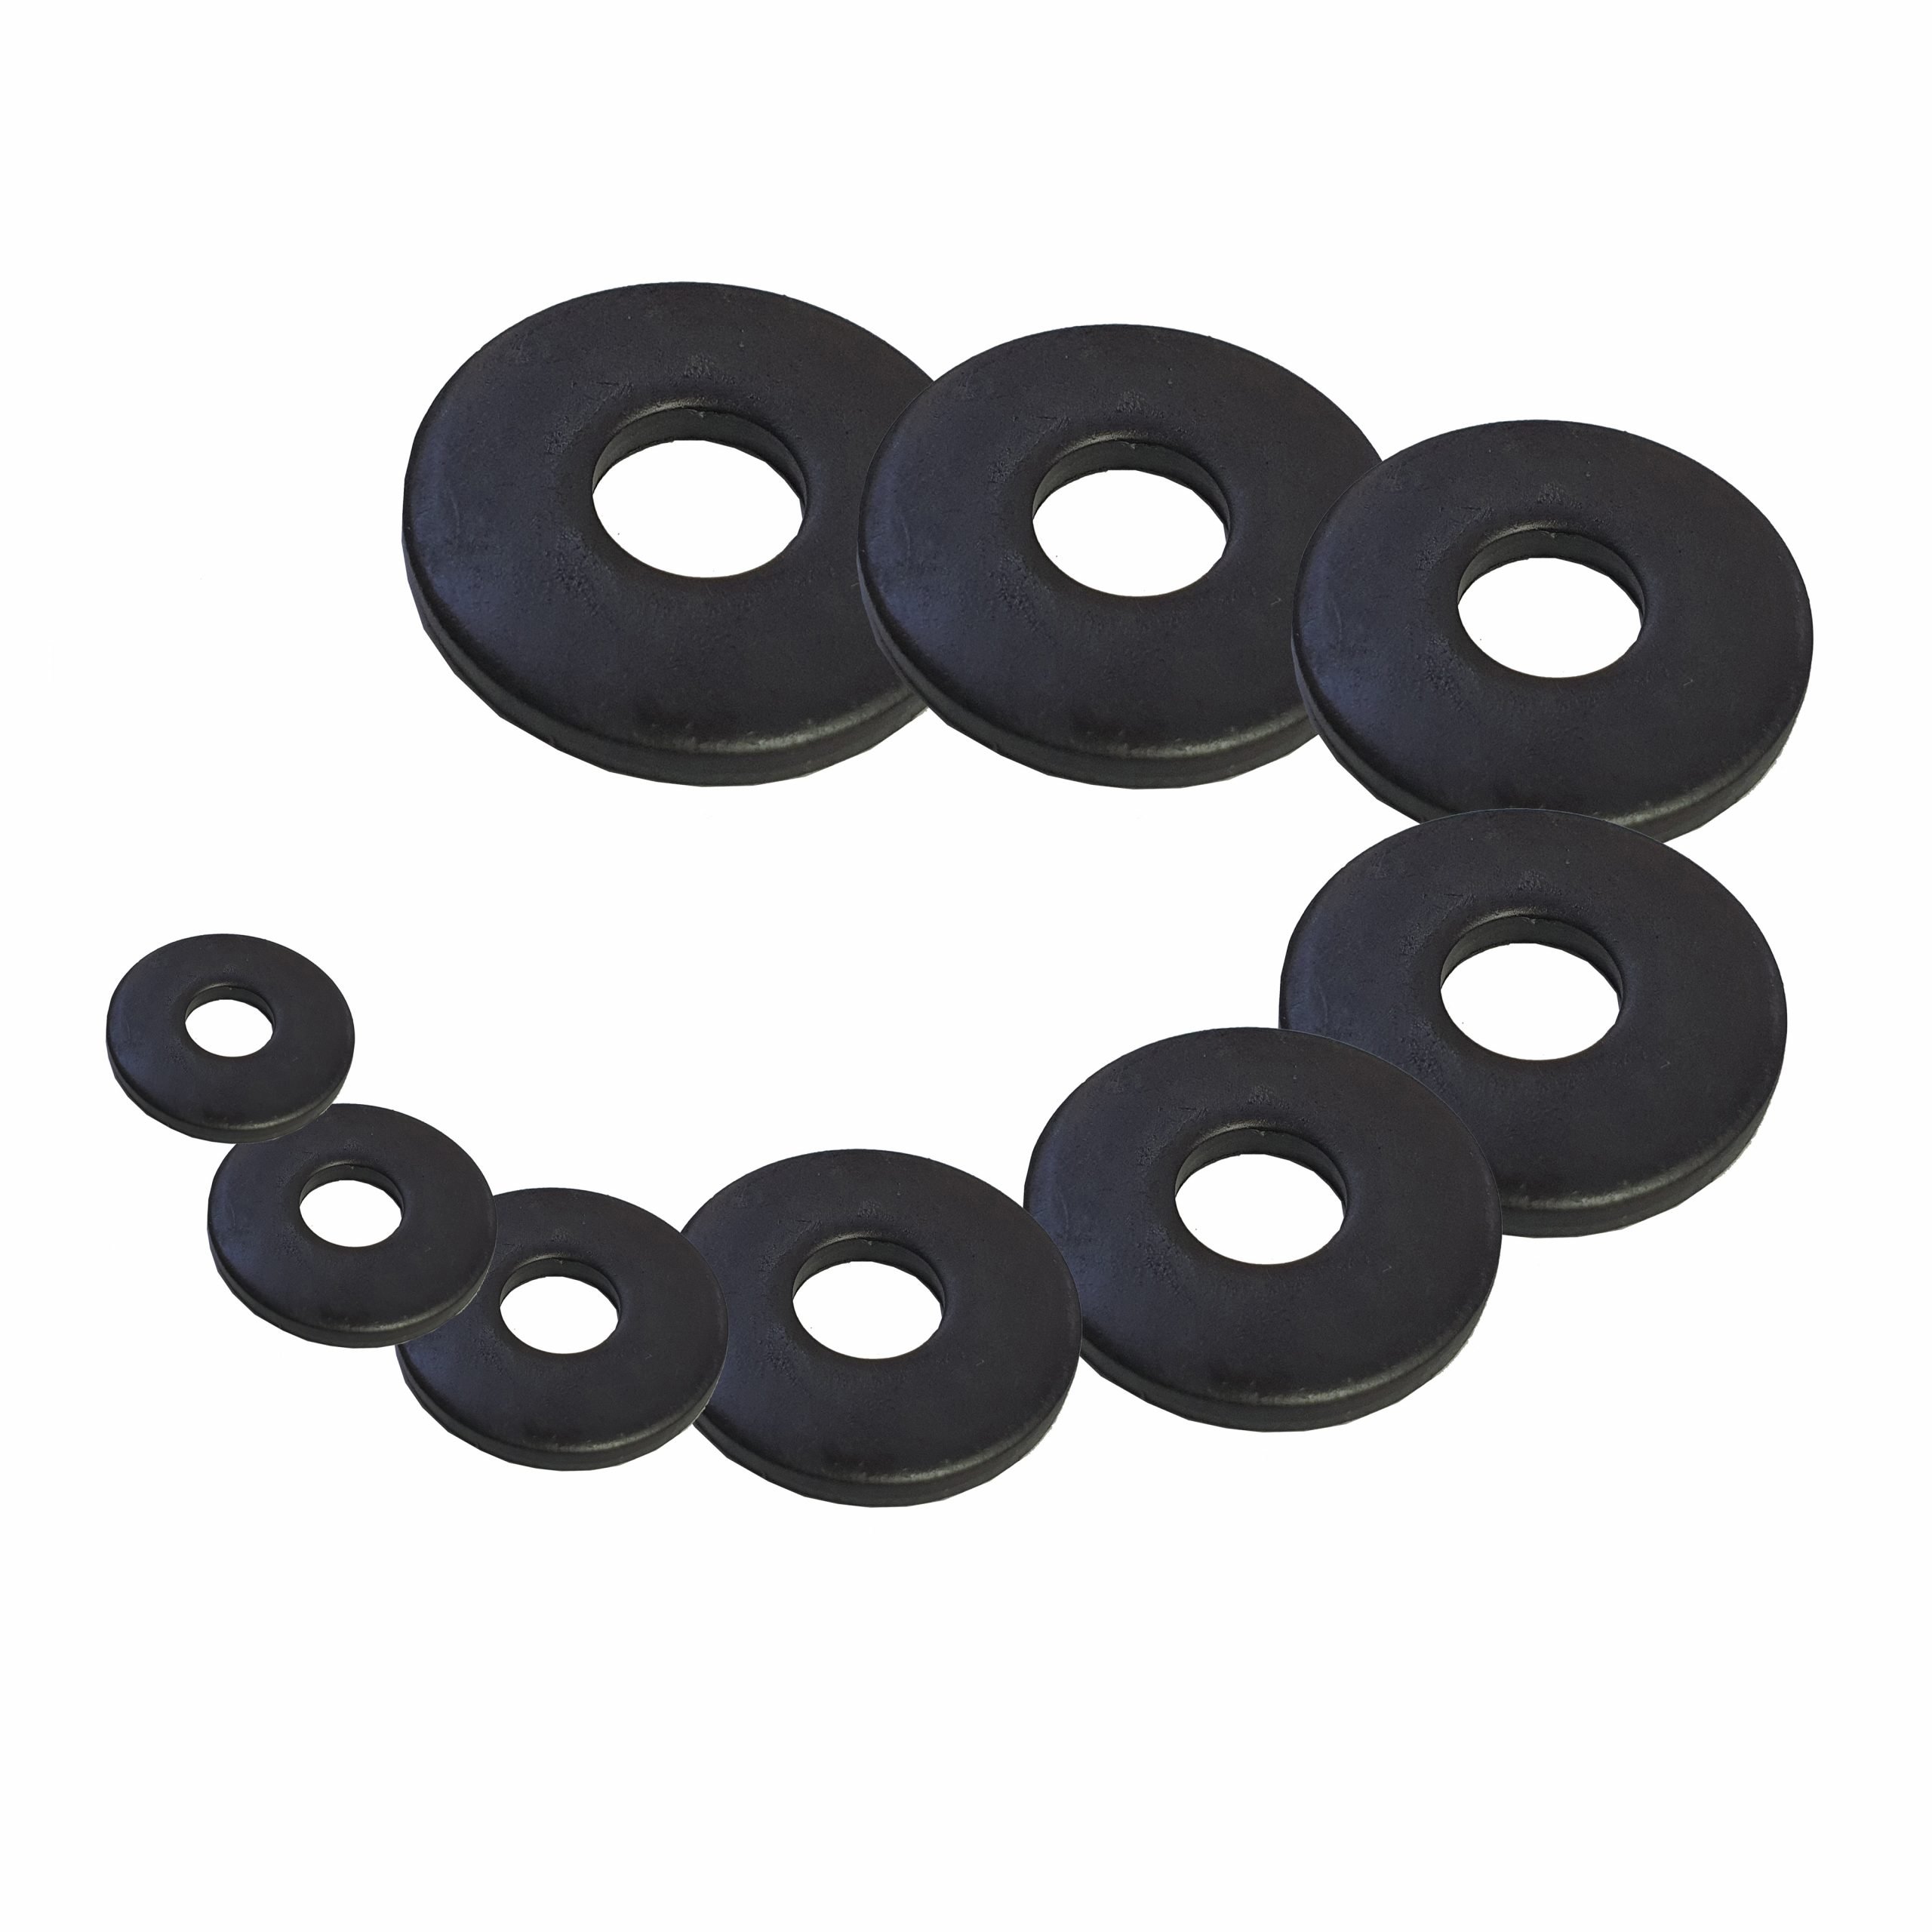 QTY 20 M10 x 30 x 2.5mm thick LARGE NYLON PENNY REPAIR WASHERS FREE P&P TO UK